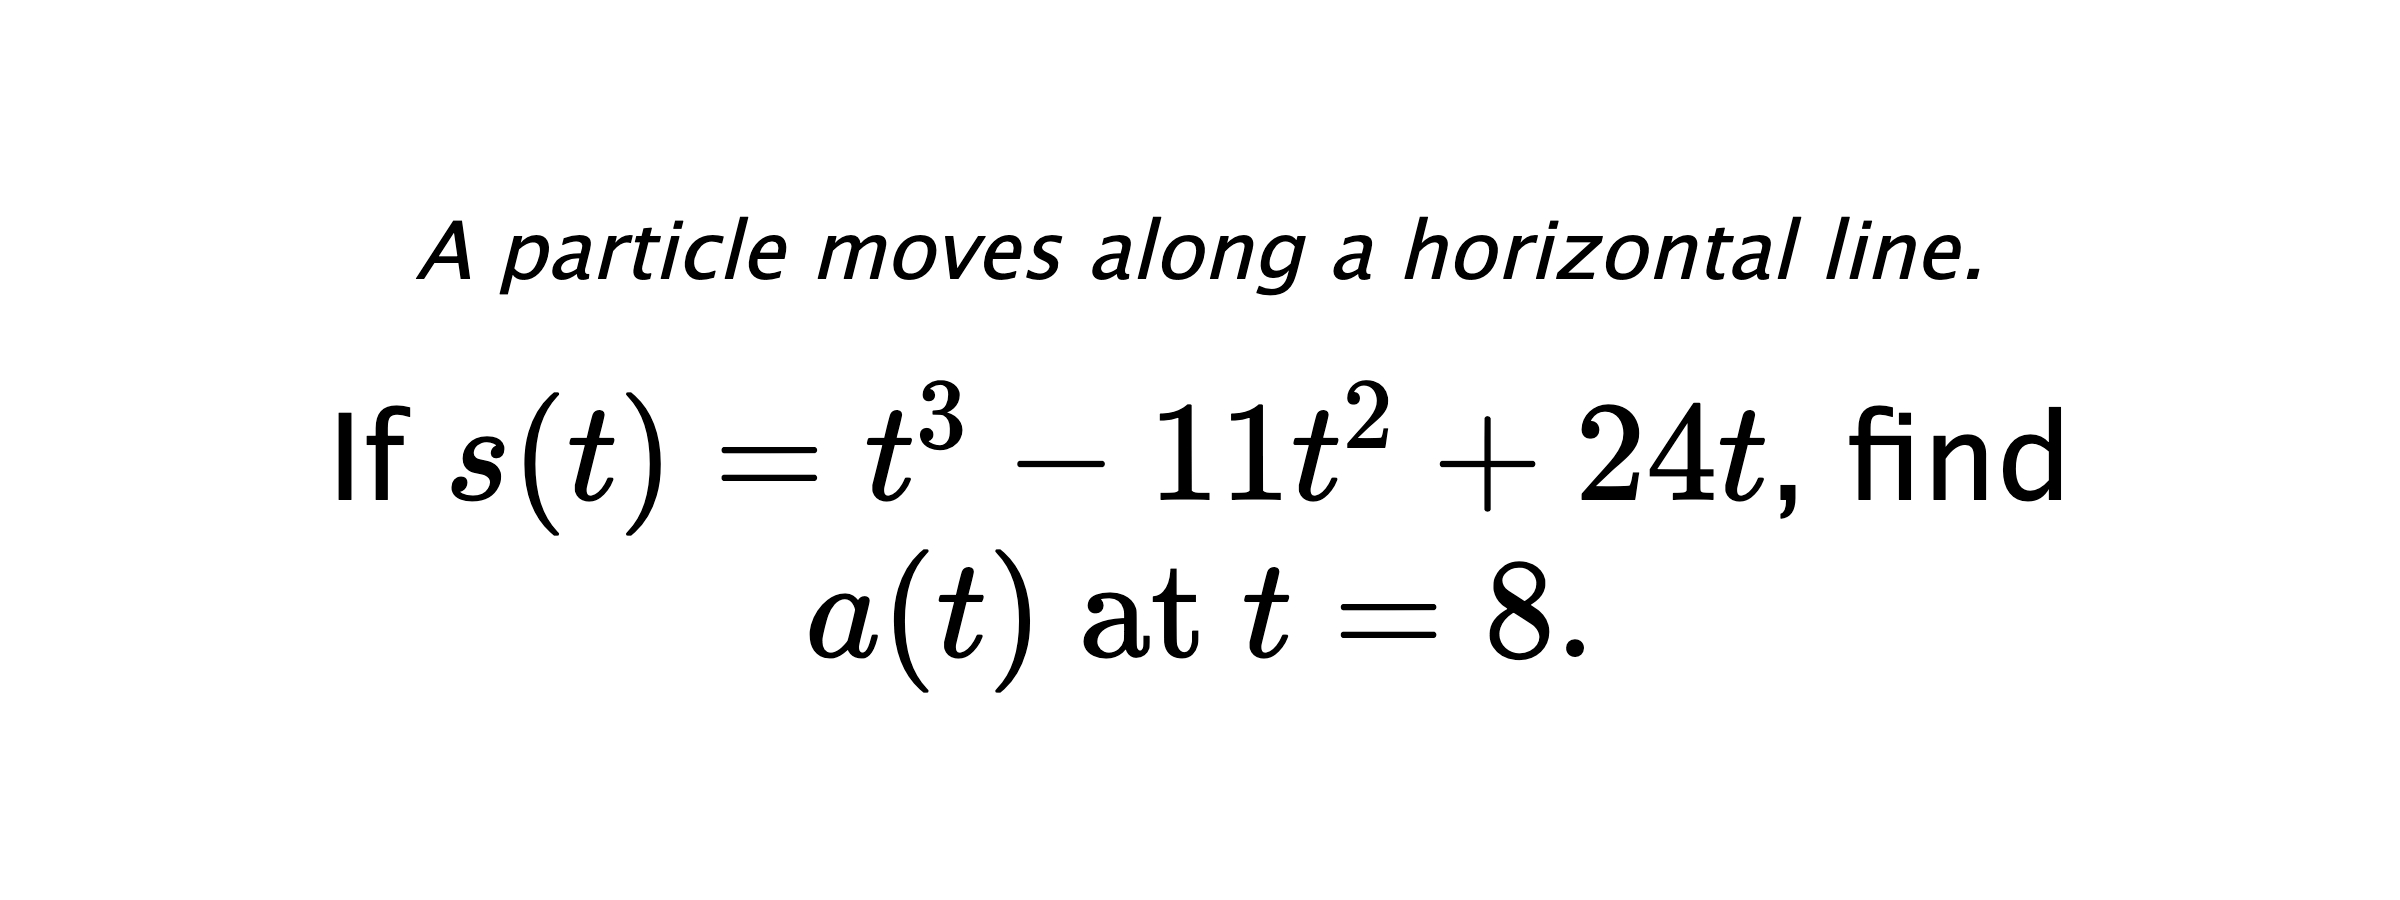 A particle moves along a horizontal line. If $ s(t)=t^3-11t^2+24t $, find $ a(t) \text{ at } t=8. $